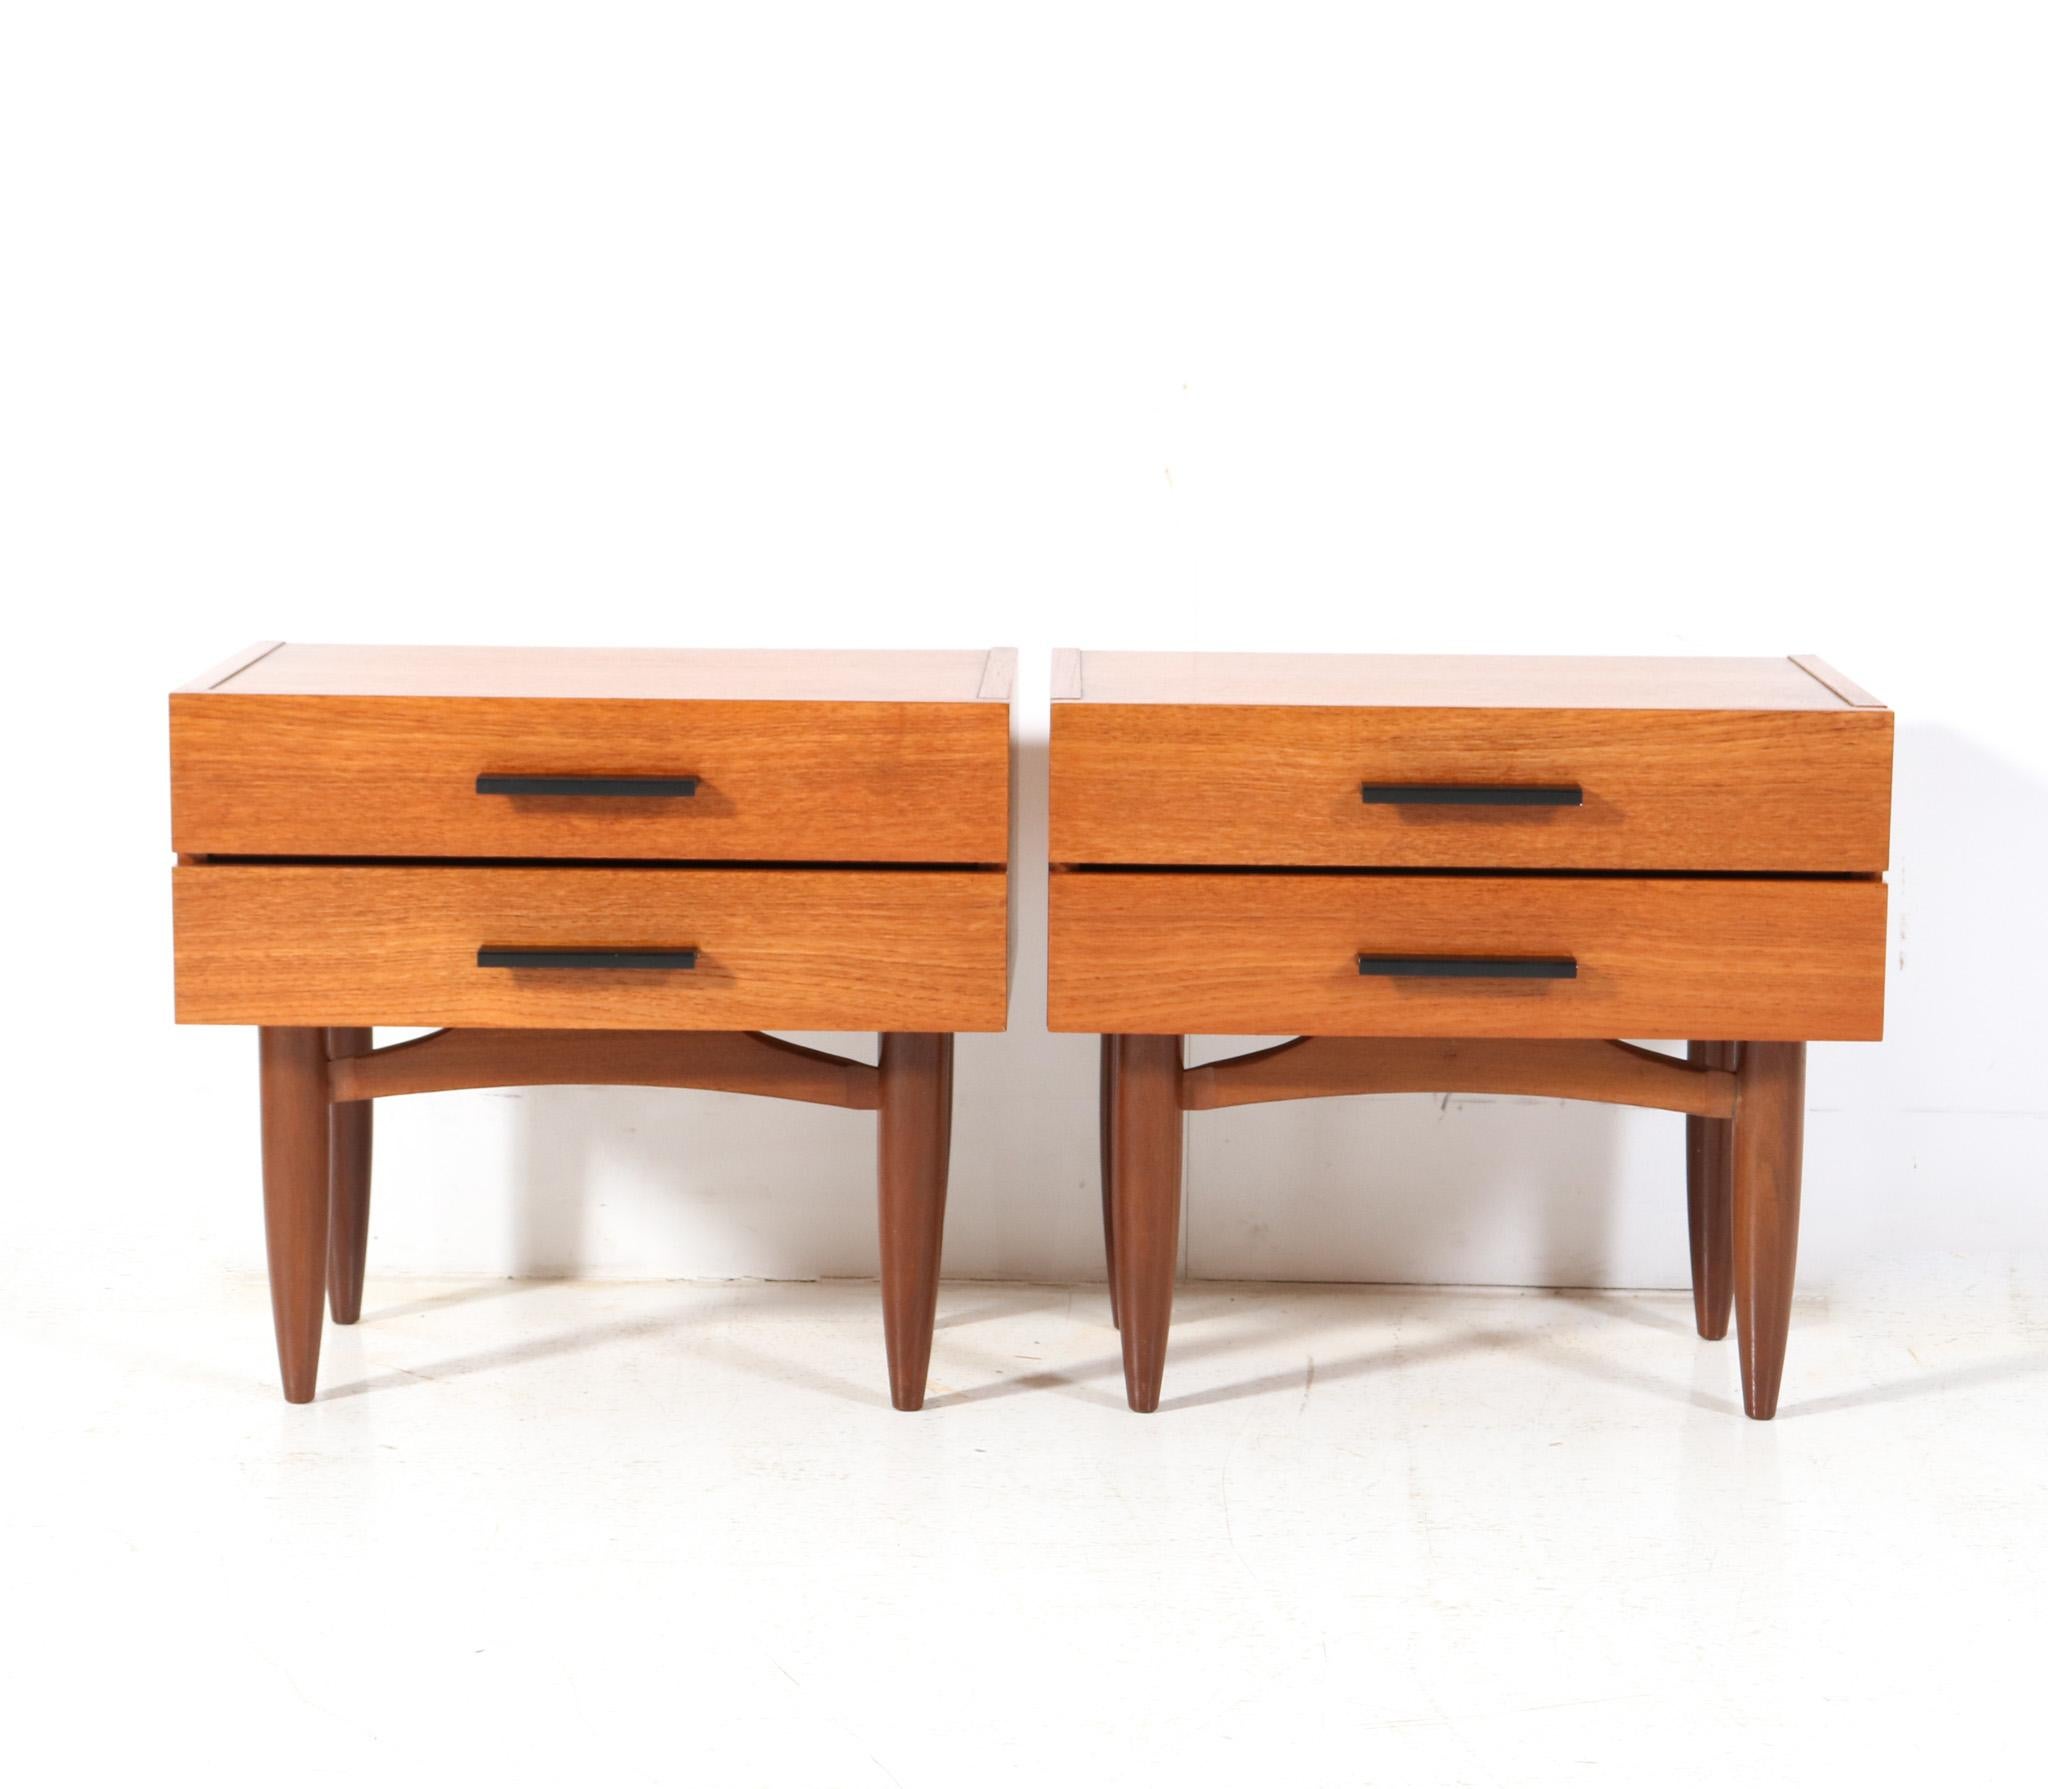 Stunning and elegant pair of Mid-Century Modern nightstands or bedside tables.
Striking Dutch design from the 1960s.
Solid teak and original teak veneered base with
This wonderful pair of Mid-Century Modern nightstands or bedside tables is in very